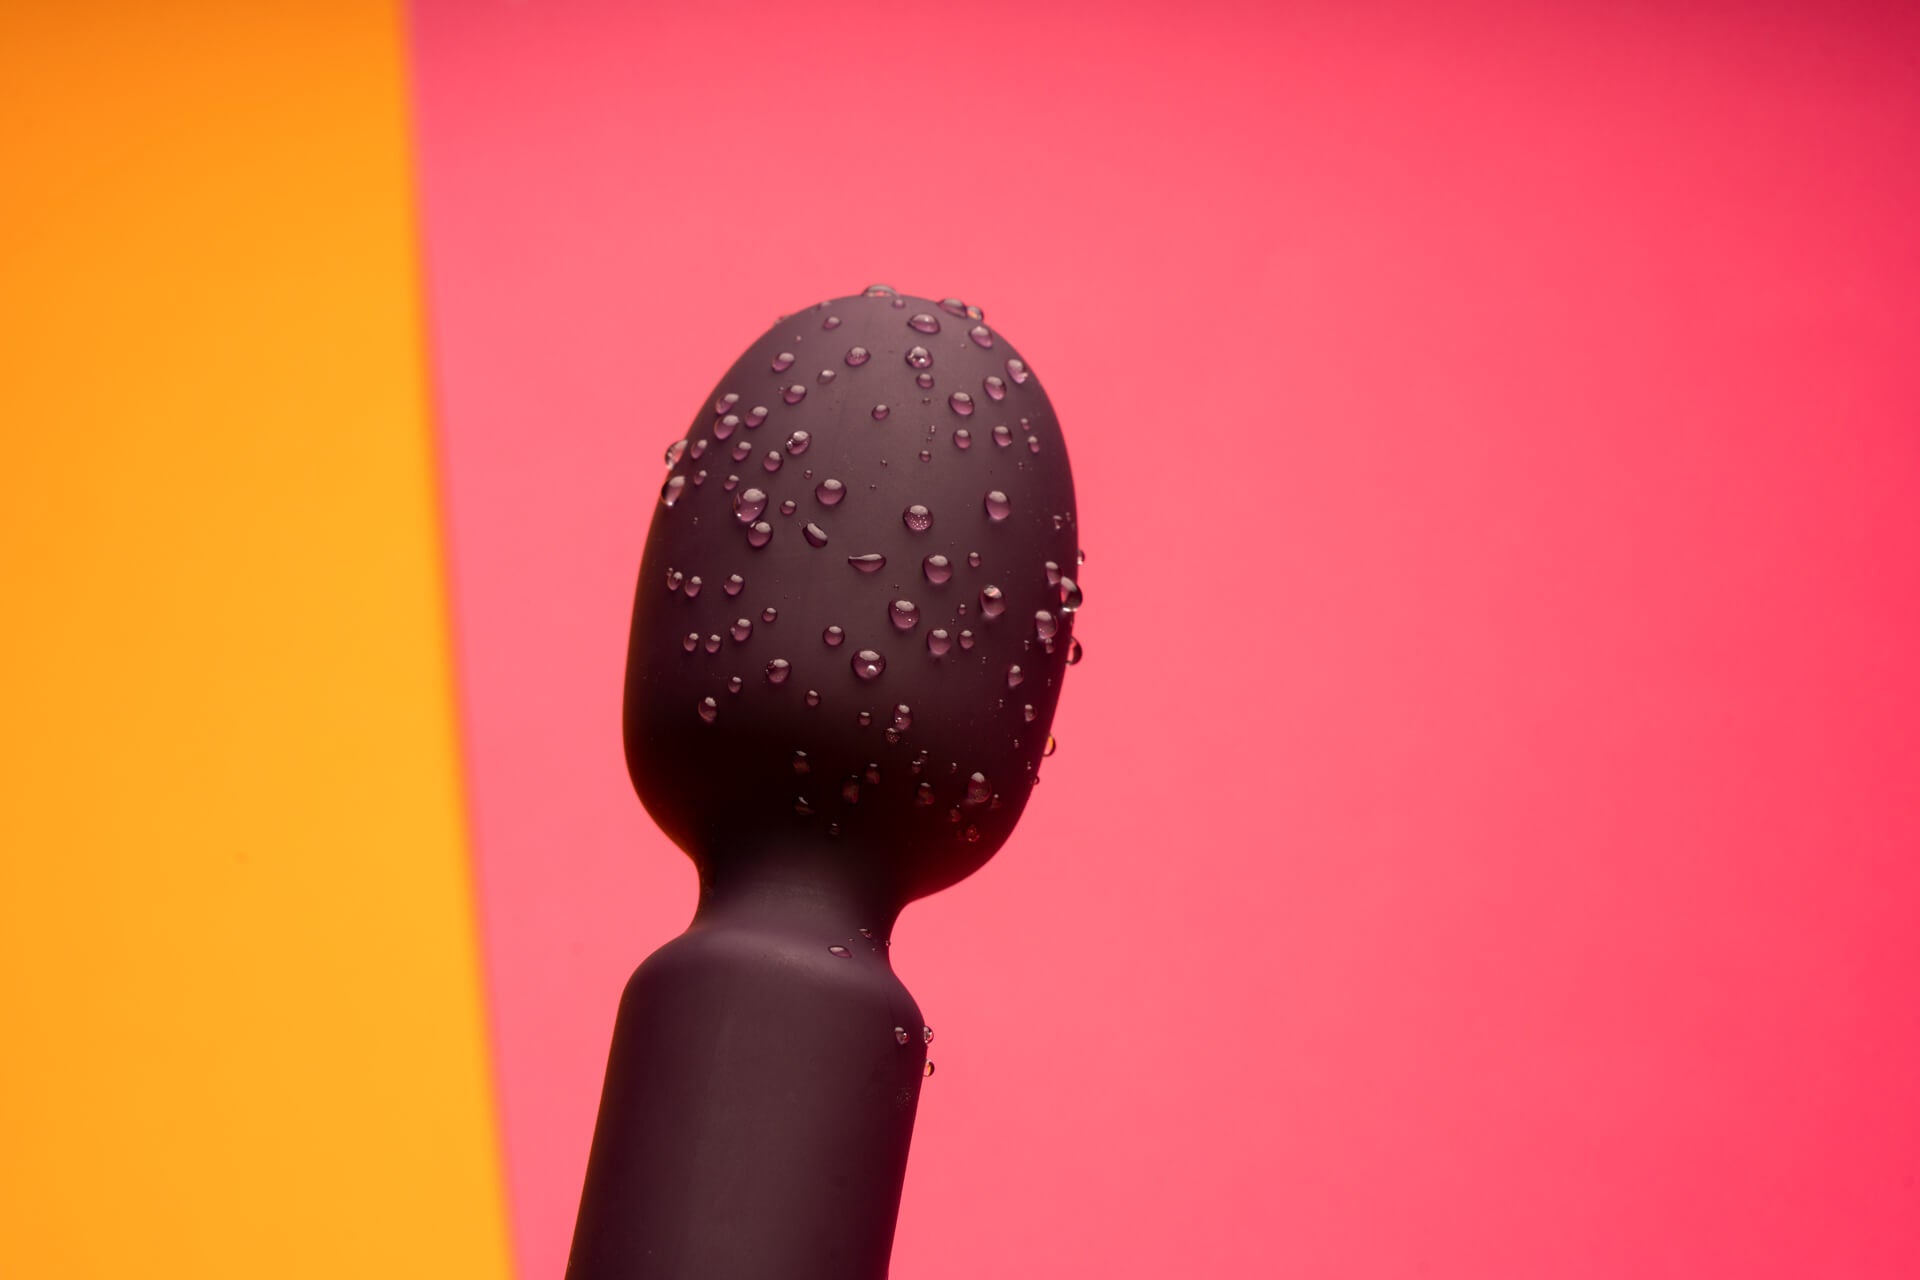 Water droplets on the massager showing waterproof accessible wand vibrator.